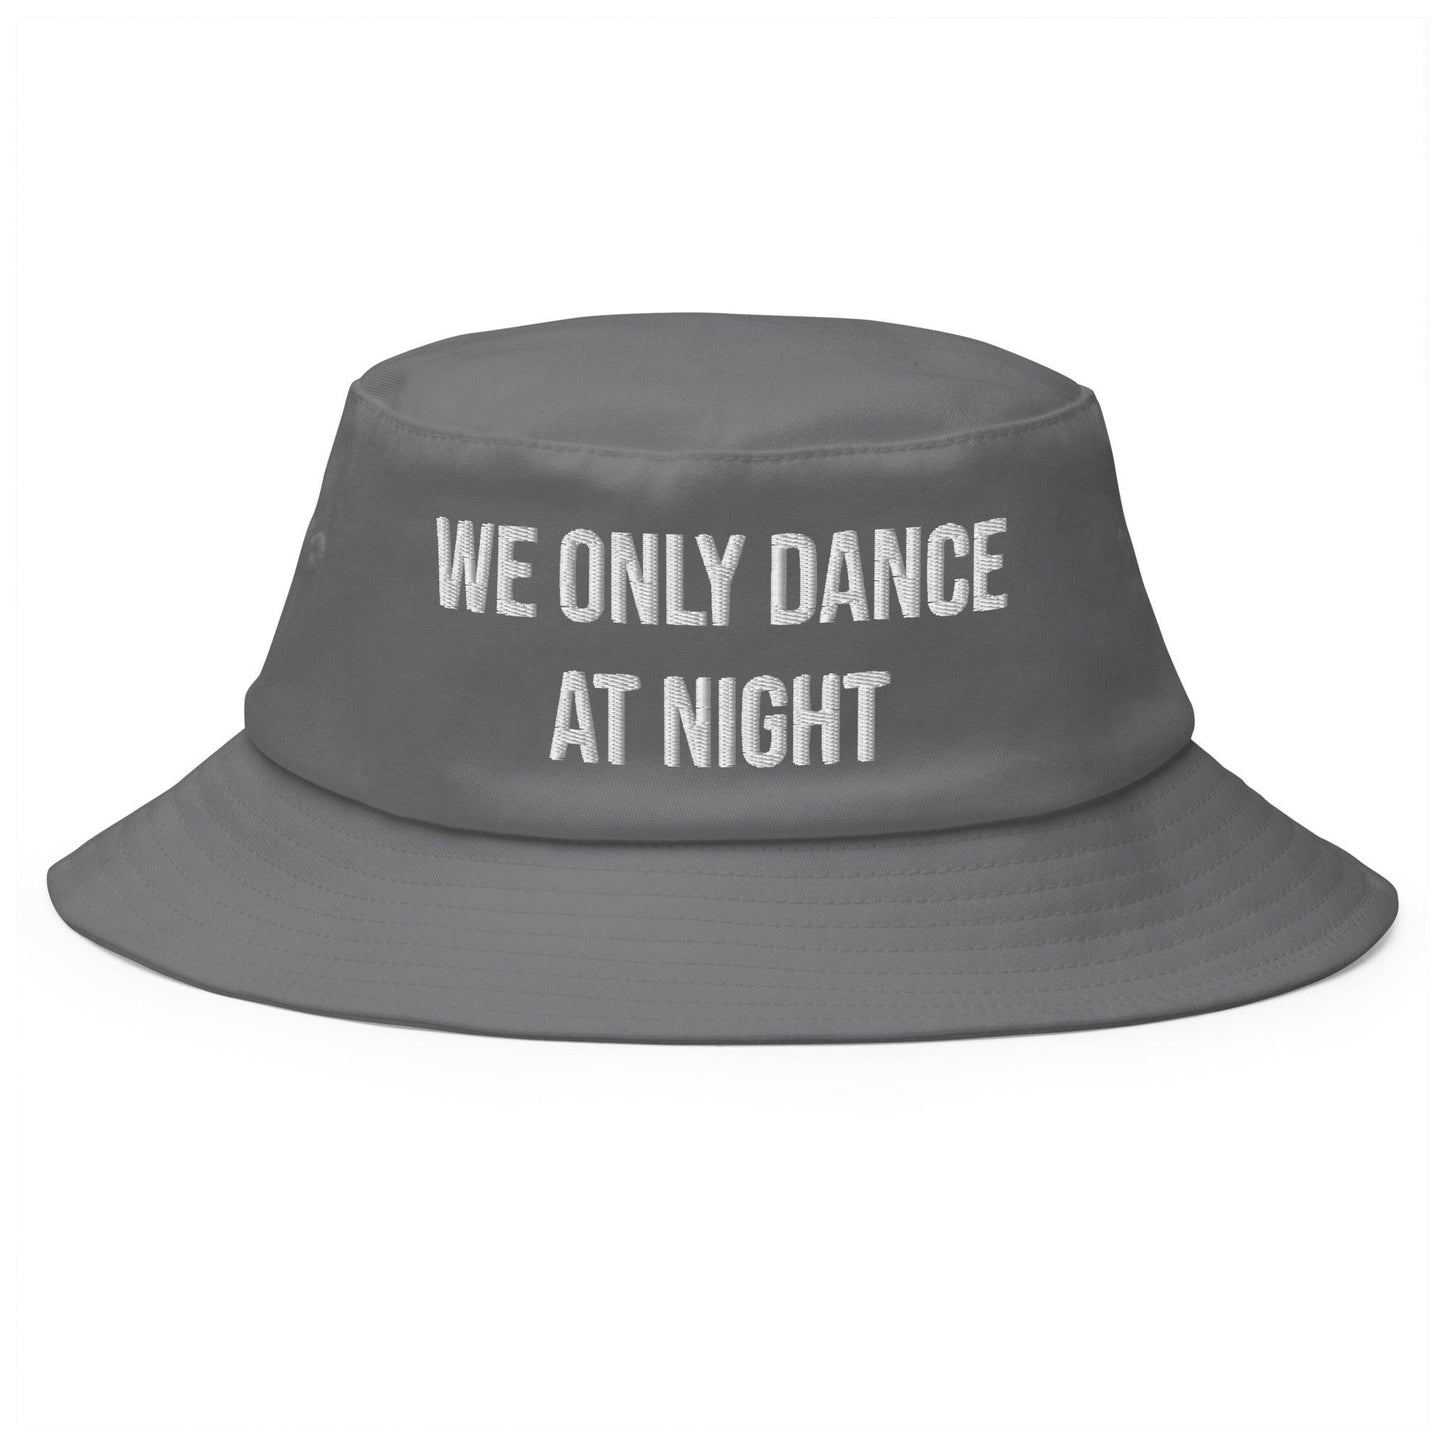 We only dance at night - Old School Bucket Hat - CatsOnDrugs